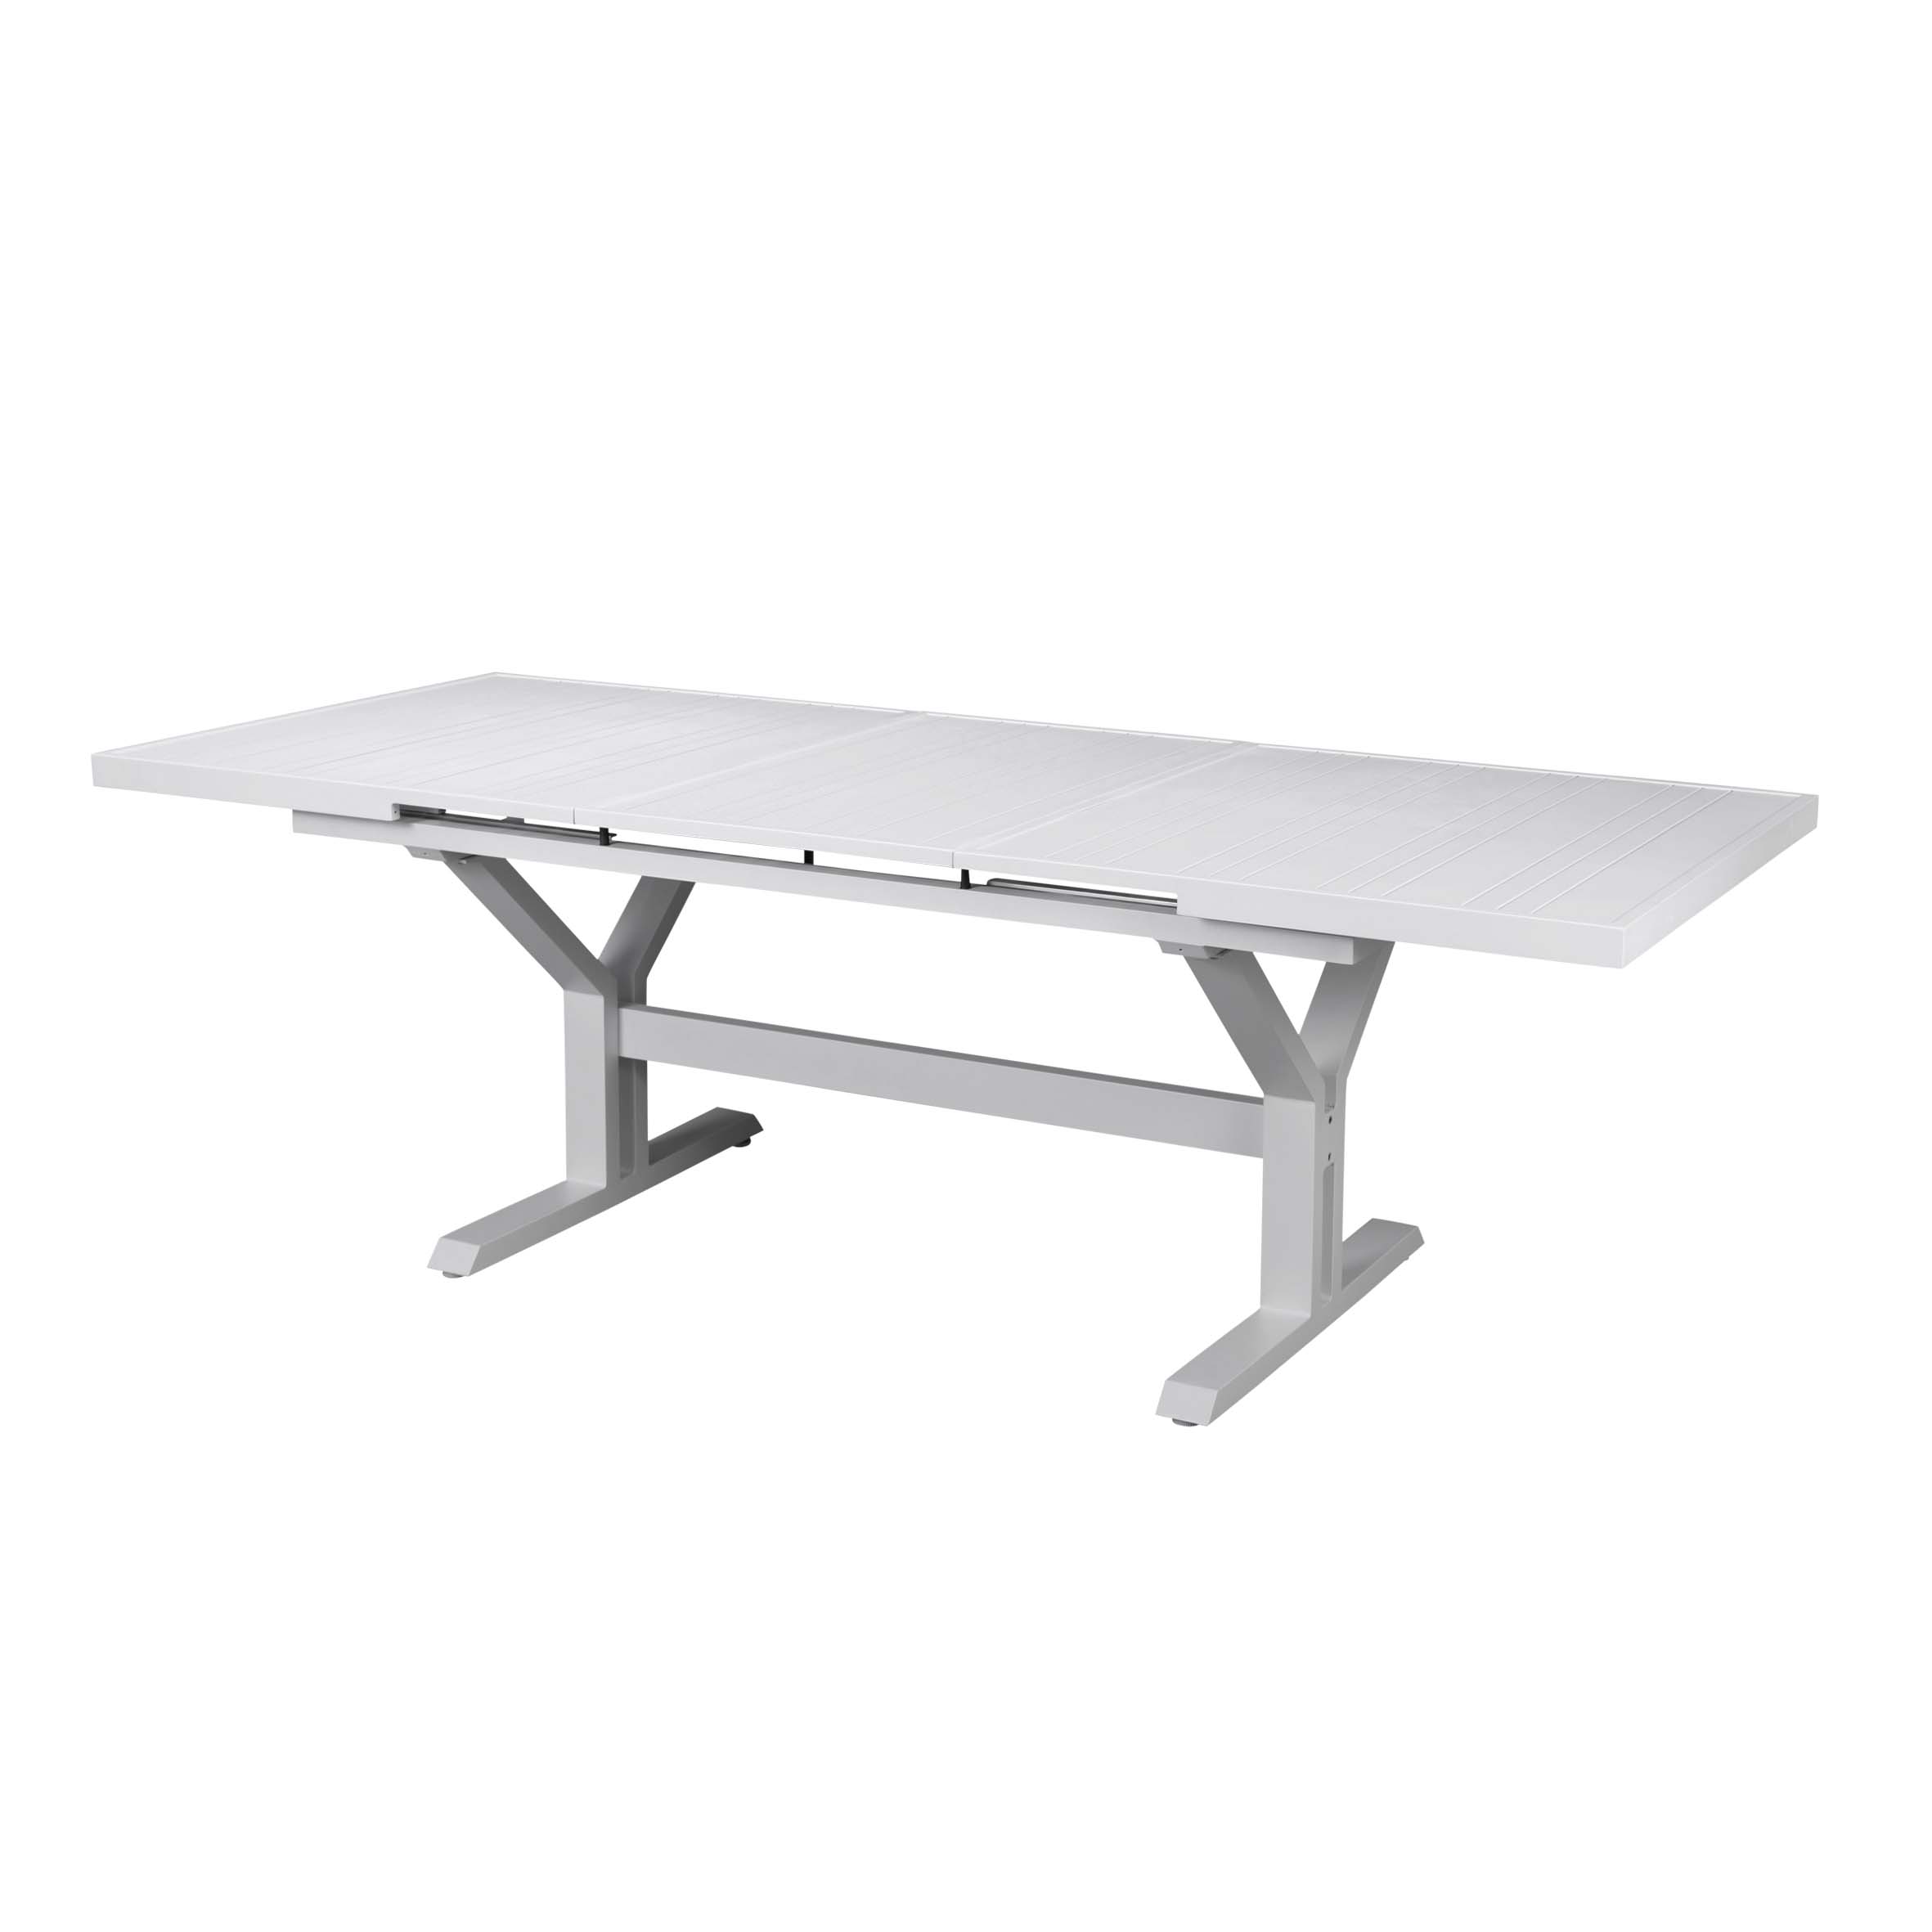 Tiffany outomatiese uitbreiding tafel S1